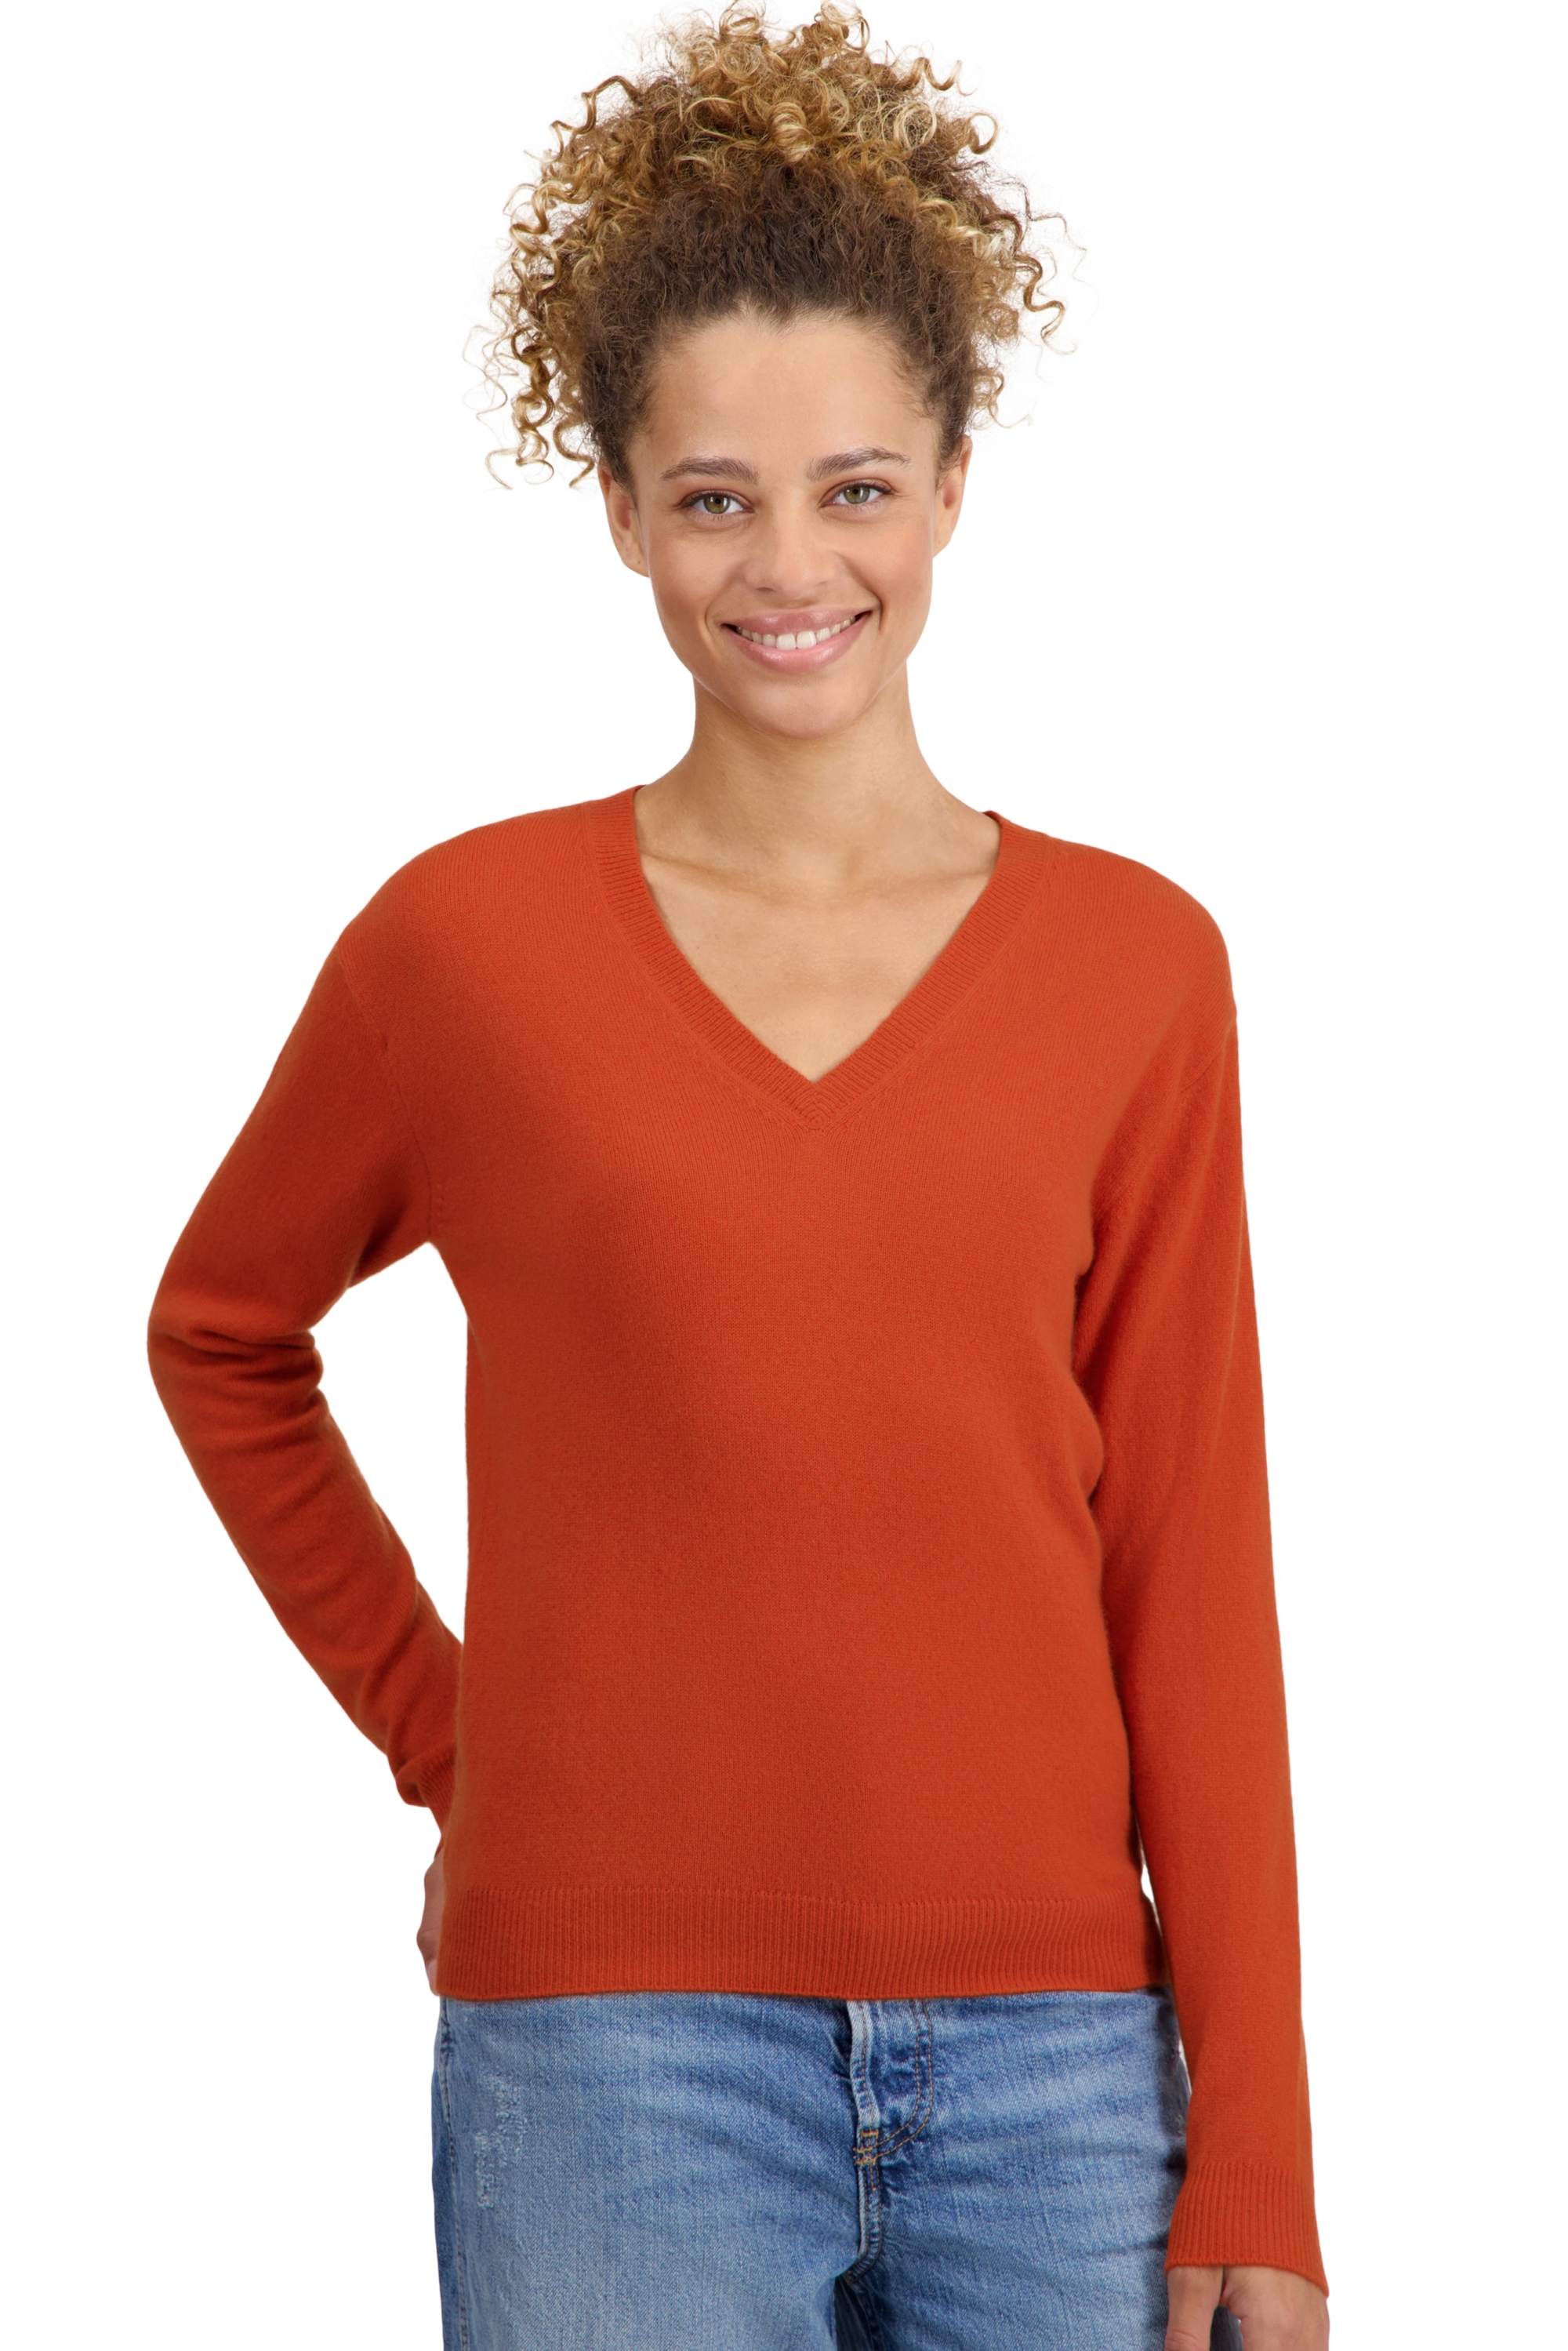 Cashmere ladies basic sweaters at low prices tessa first marmelade xs